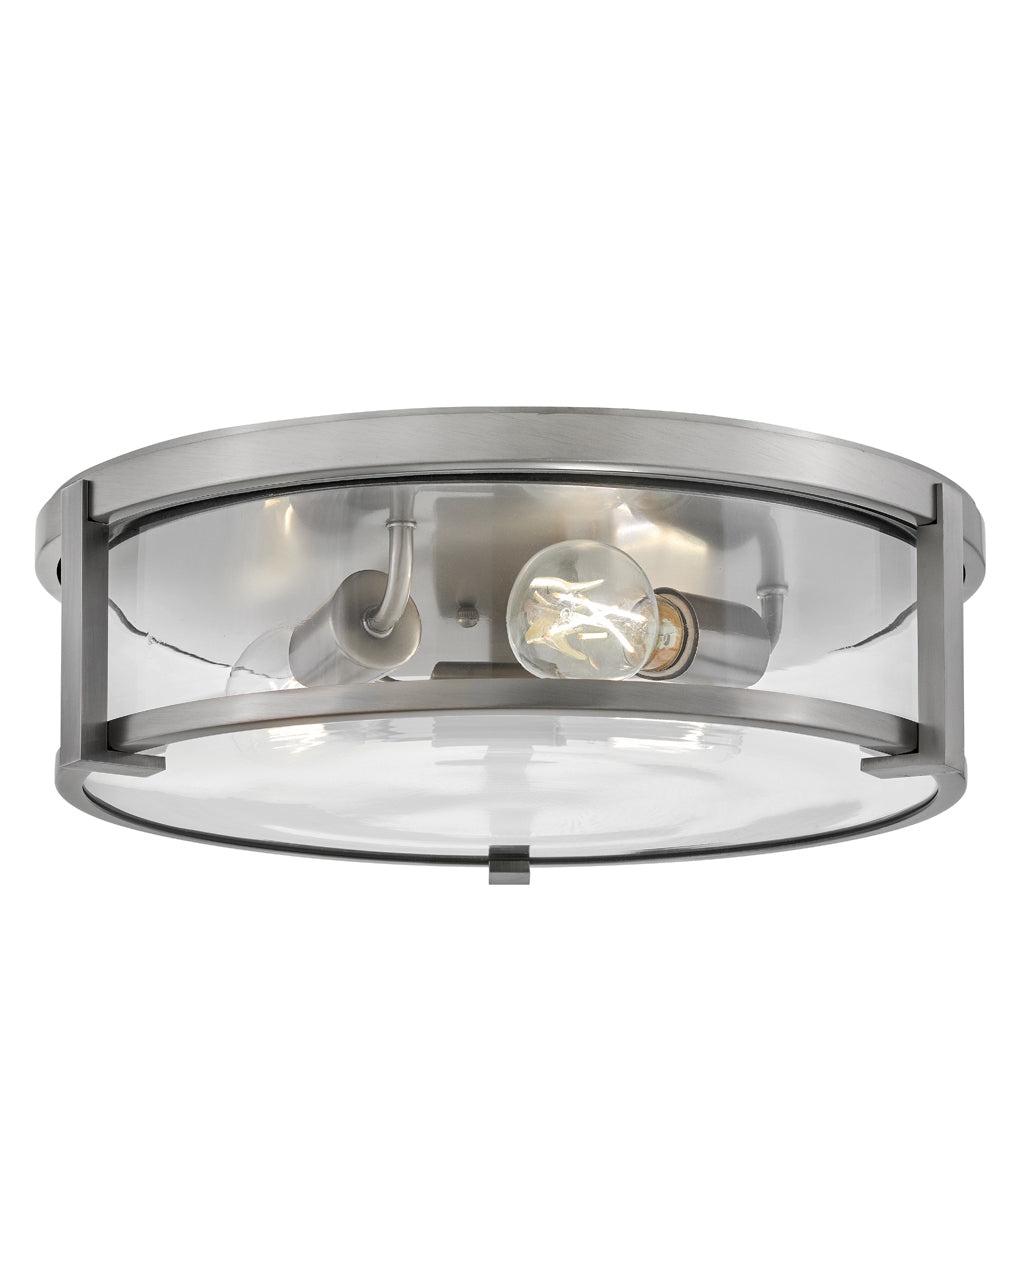 Hinkley Lowell Flush Mount Flush Mount Ceiling Light Hinkley Antique Nickel with Clear glass 16.0x16.0x4.75 